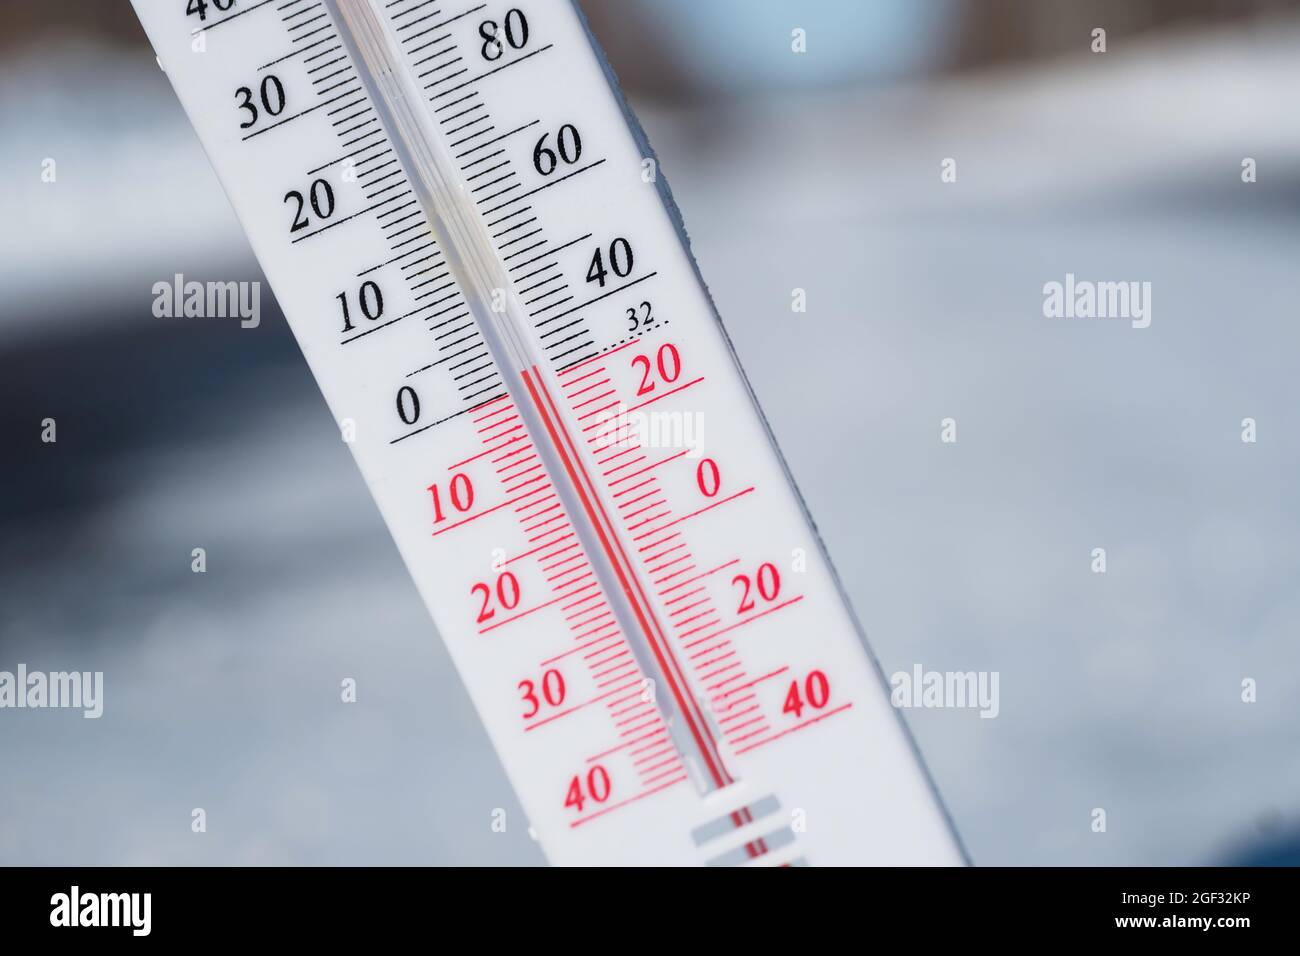 https://c8.alamy.com/comp/2GF32KP/in-winter-or-spring-the-thermometer-lies-on-the-snow-and-shows-a-negative-temperature-in-cold-weathermeteorological-conditions-with-low-air-and-ambie-2GF32KP.jpg